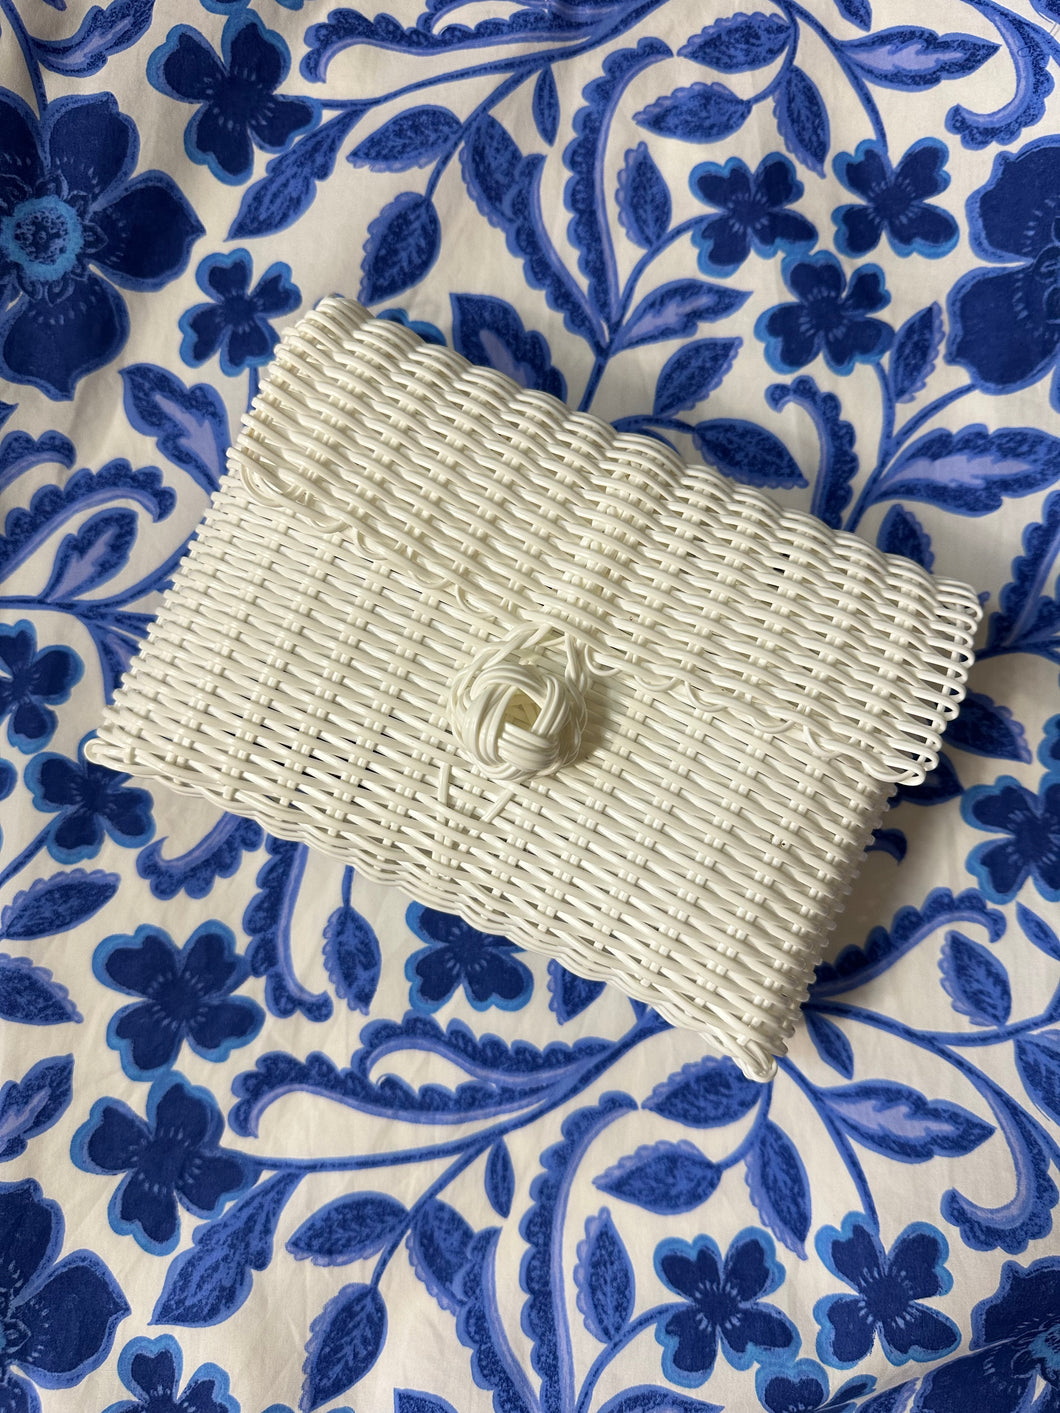 White woven clutch with front knot closure. Woven plastic, perfect for spring and summer.